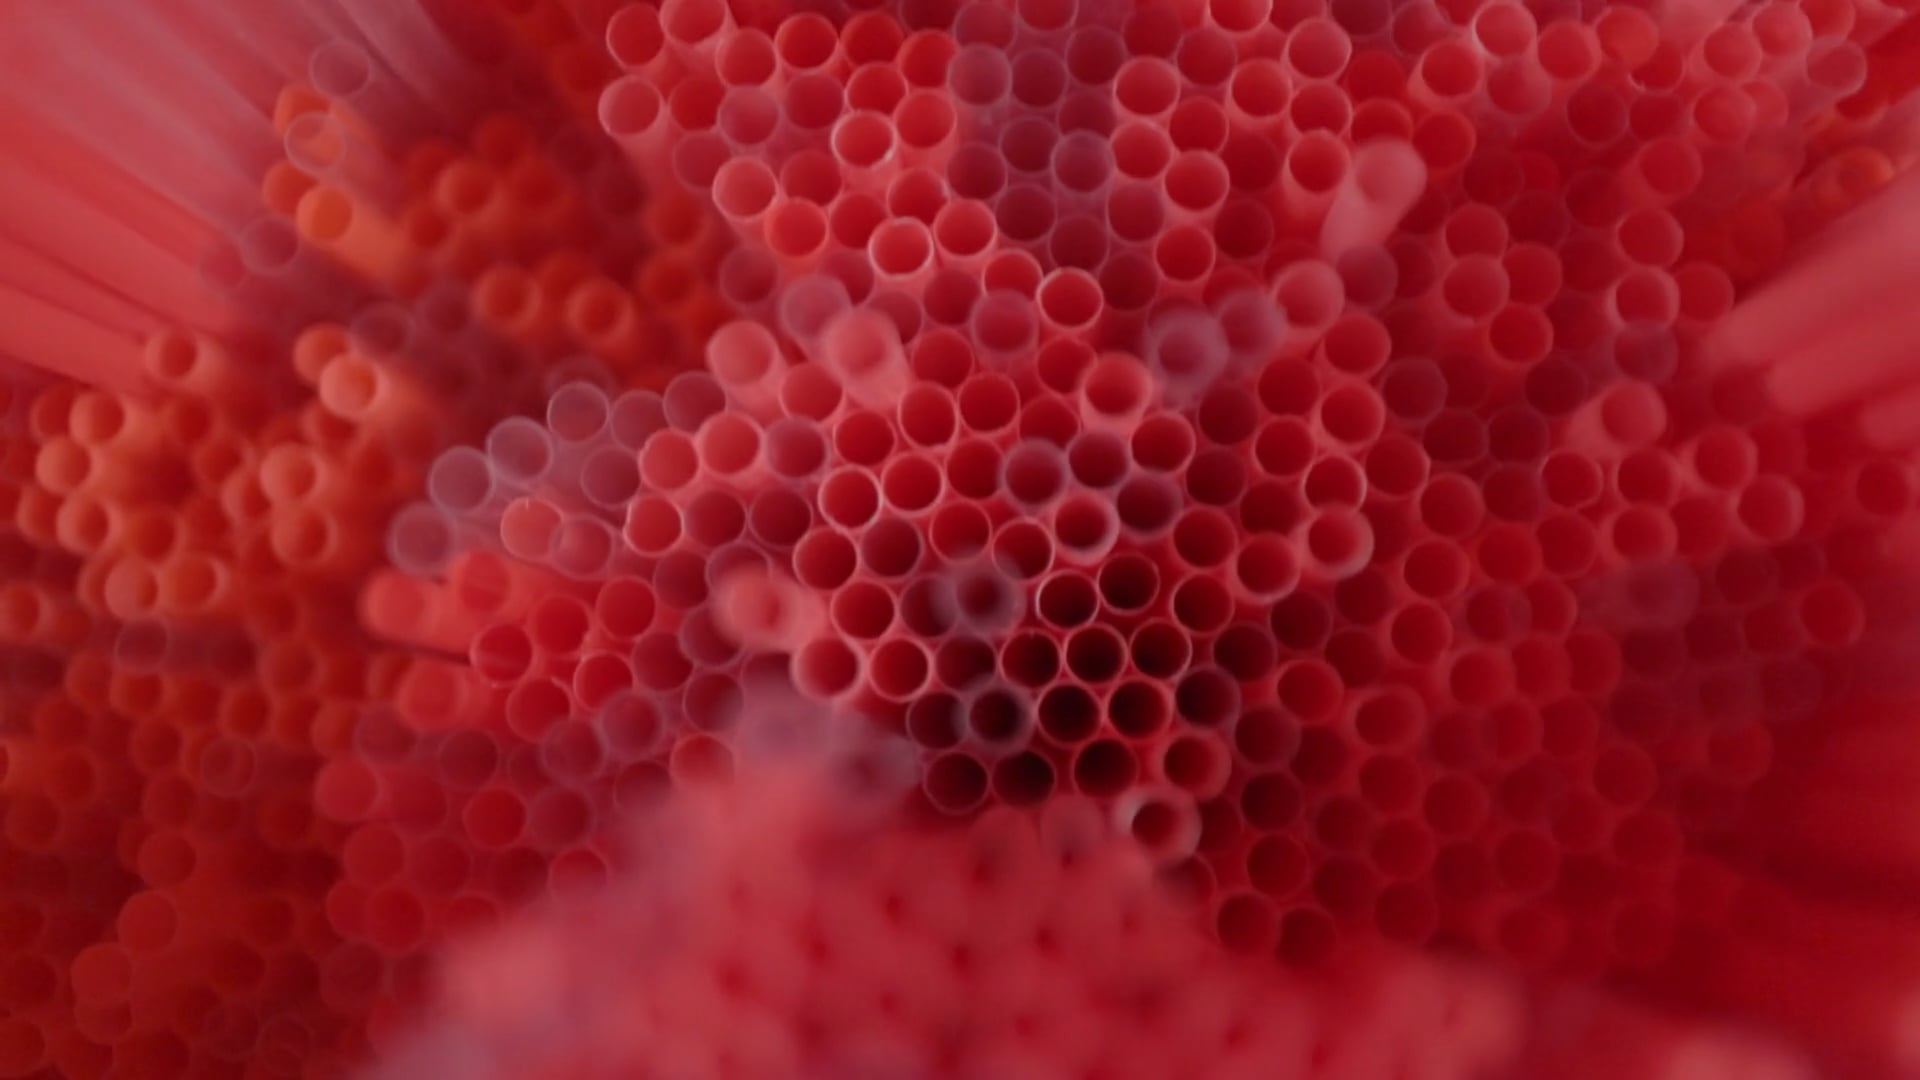 NOWNESS: THE ART IN MICROCOSMS